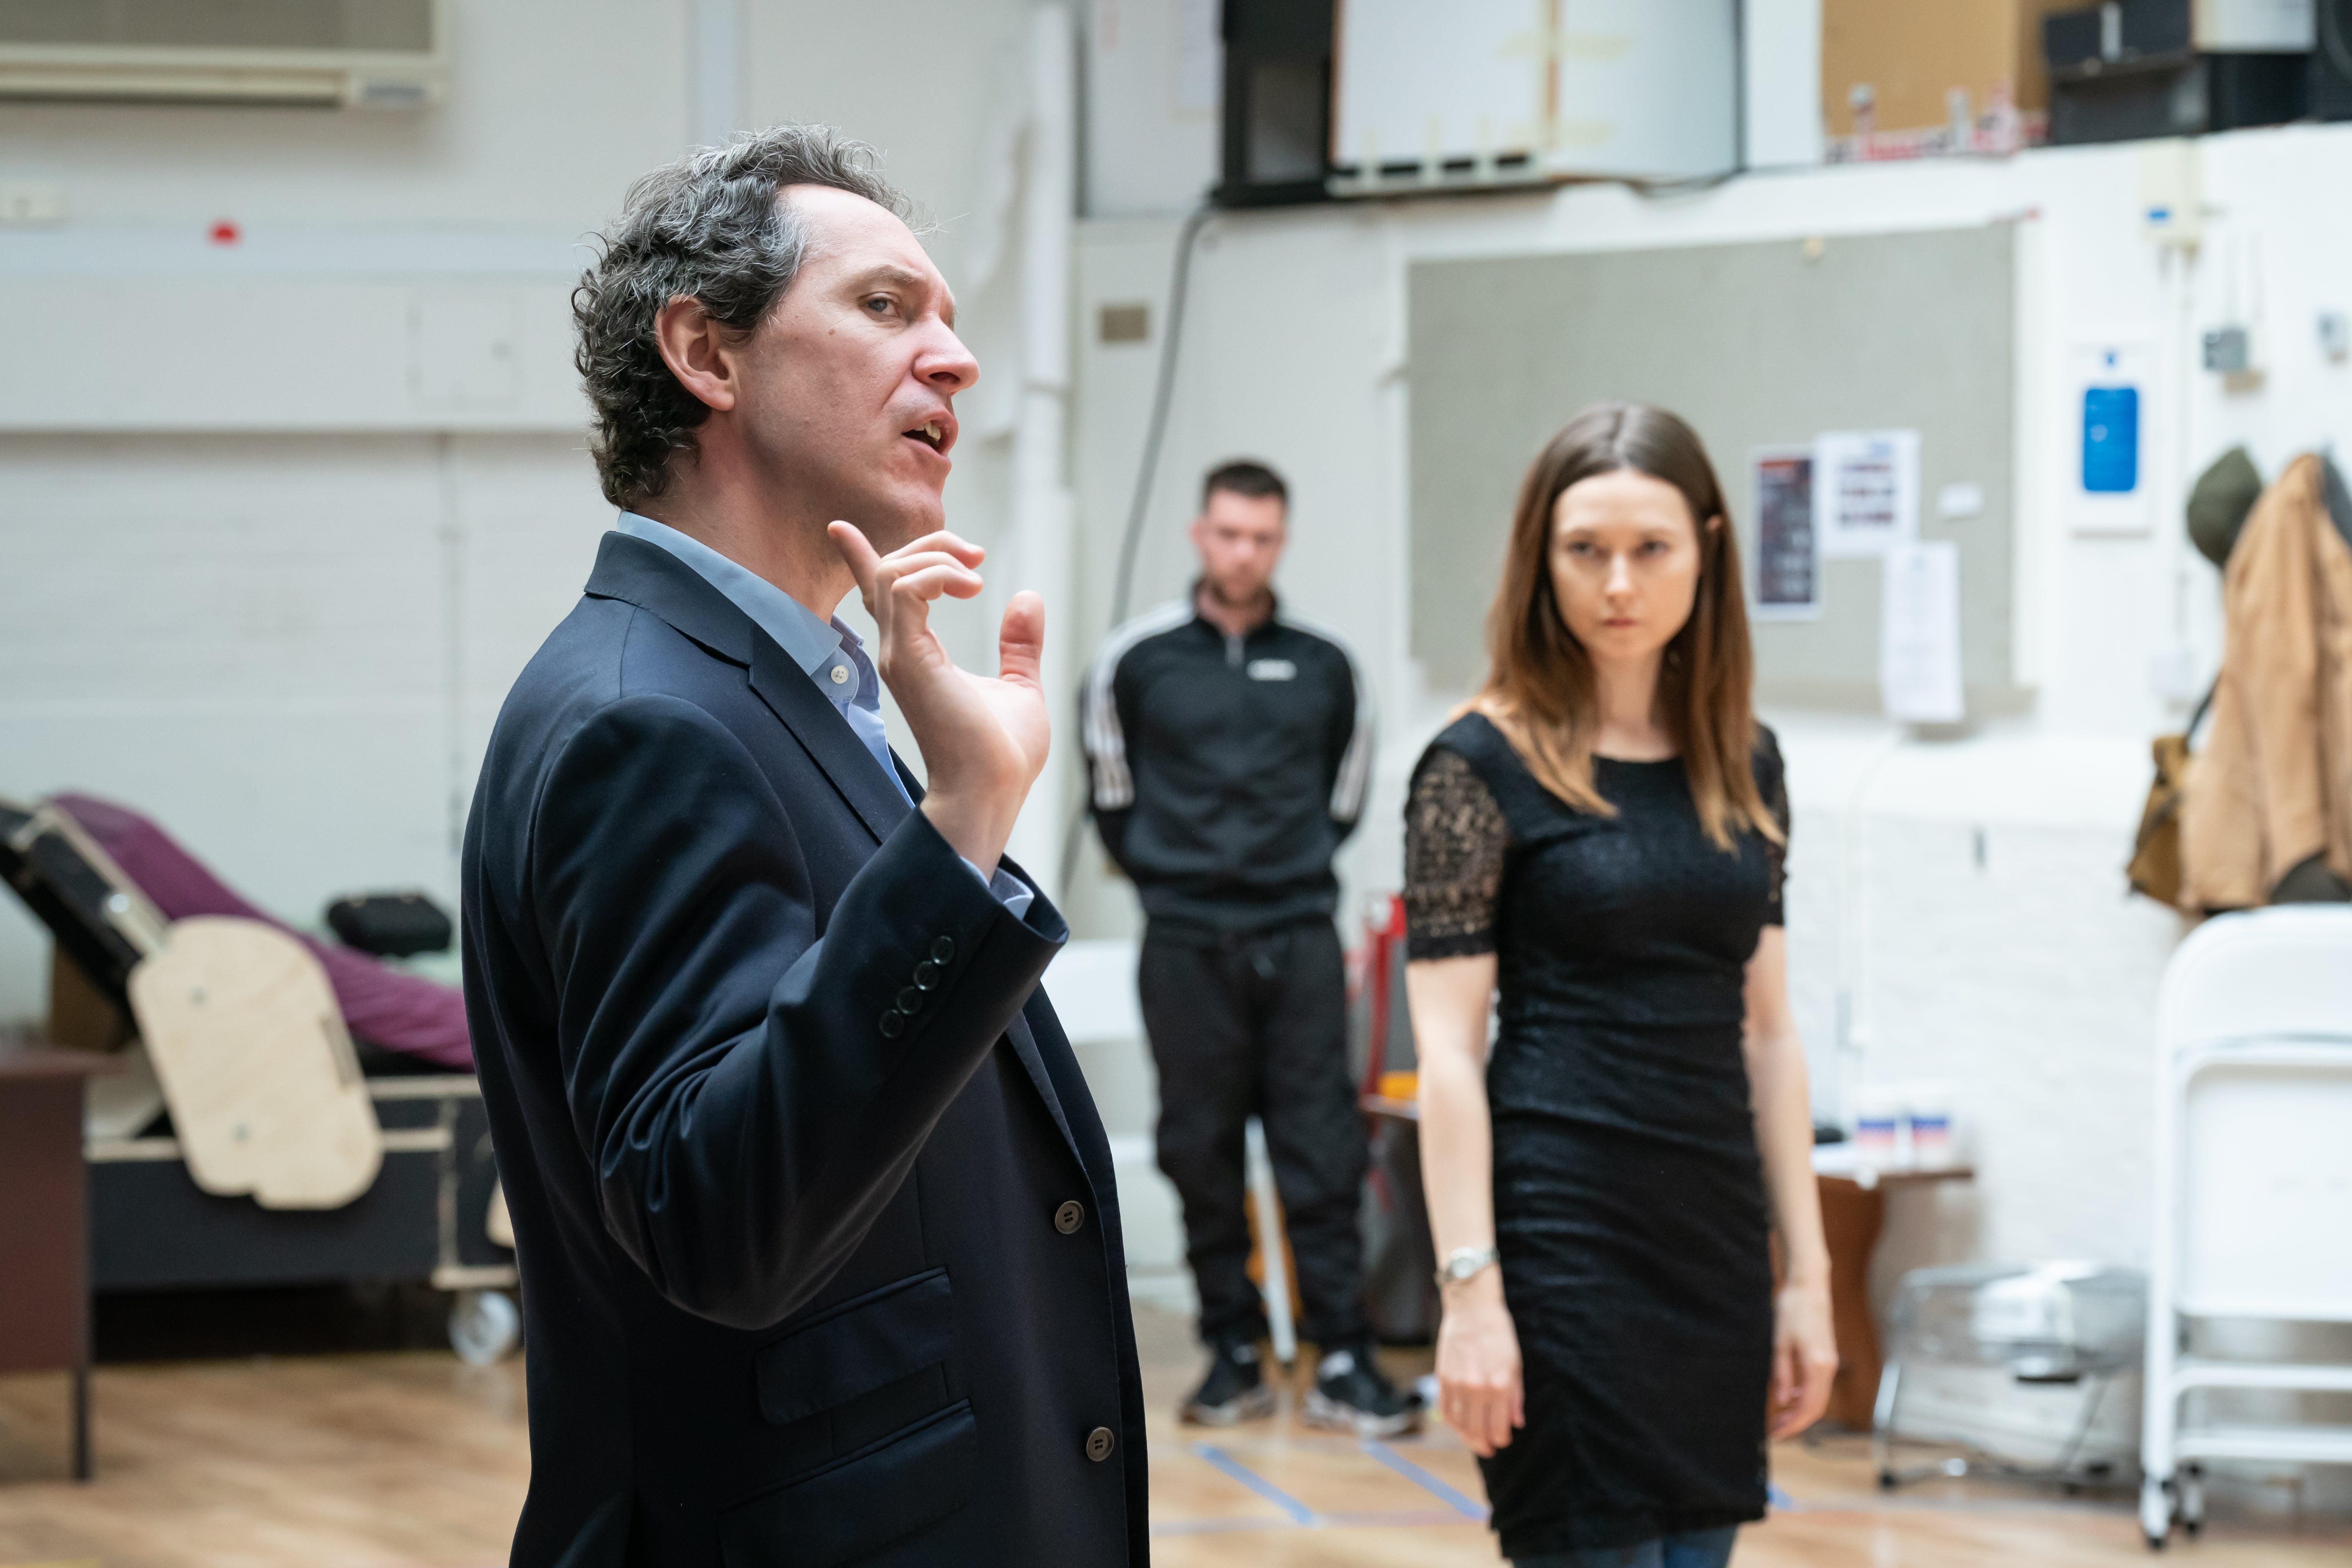 With Bertie Carvel in rehearsals